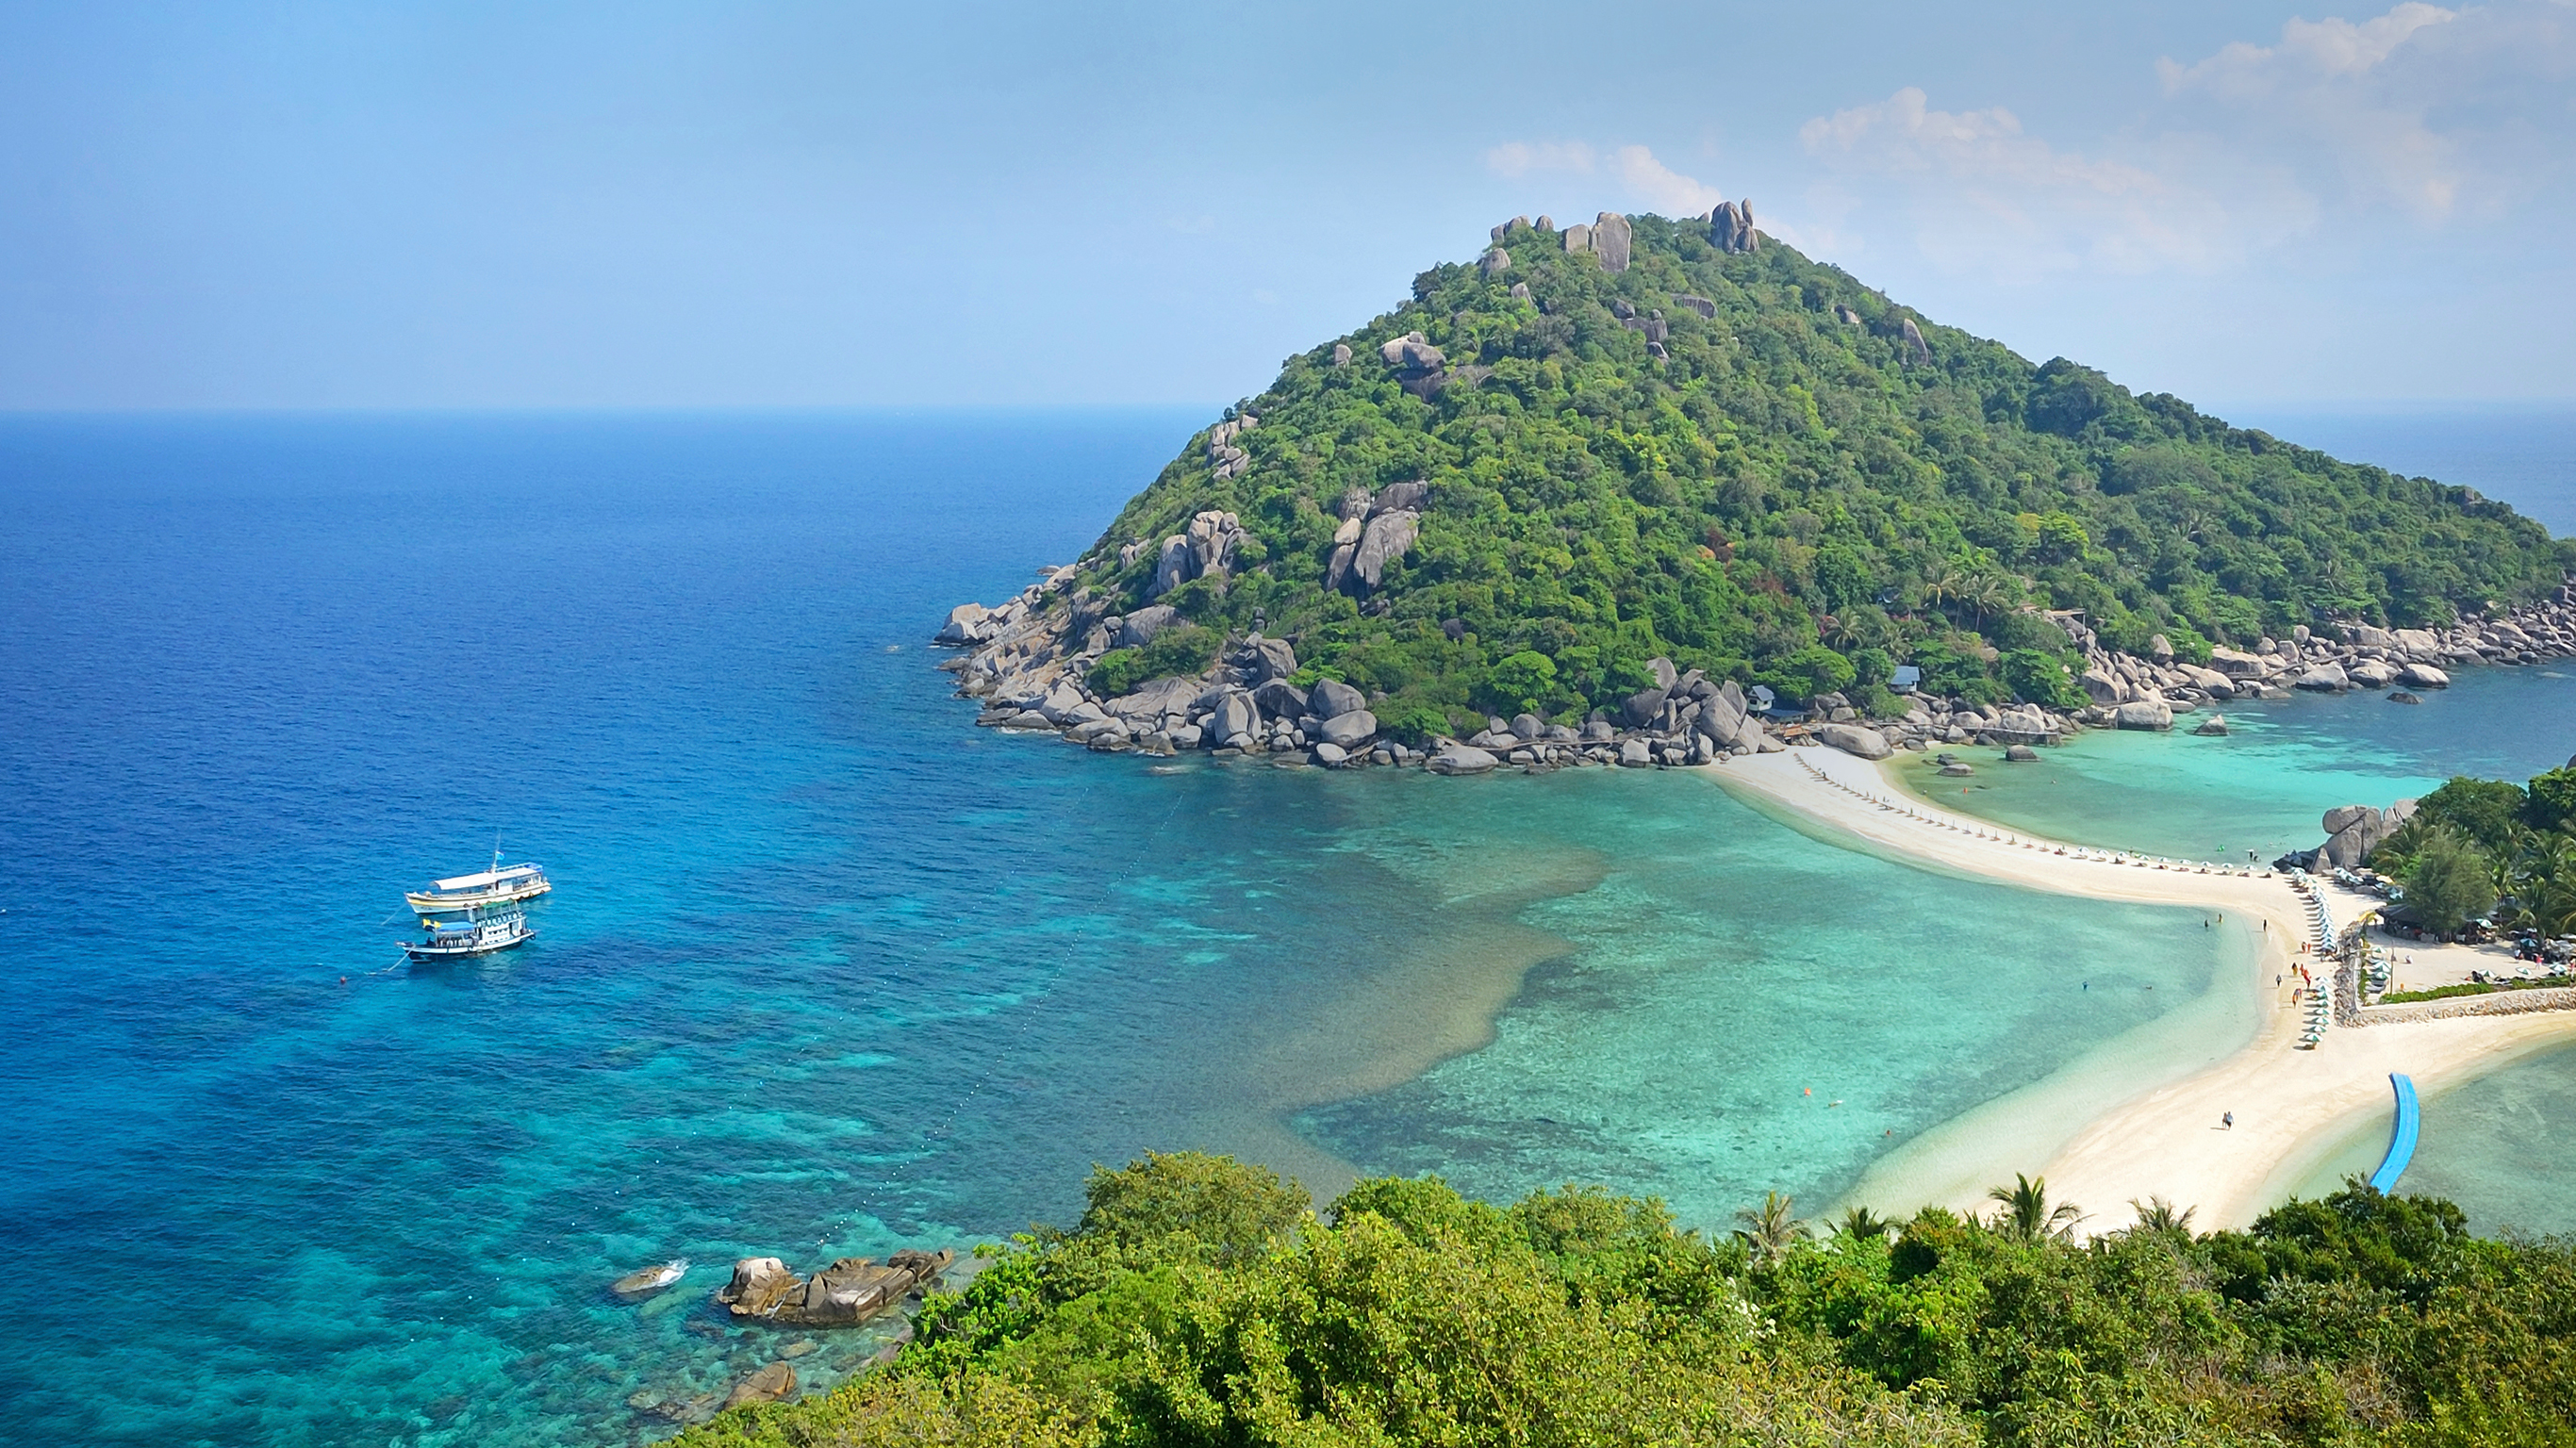 8 Obvious Reasons To Visit The Land of Smiles – Thailand